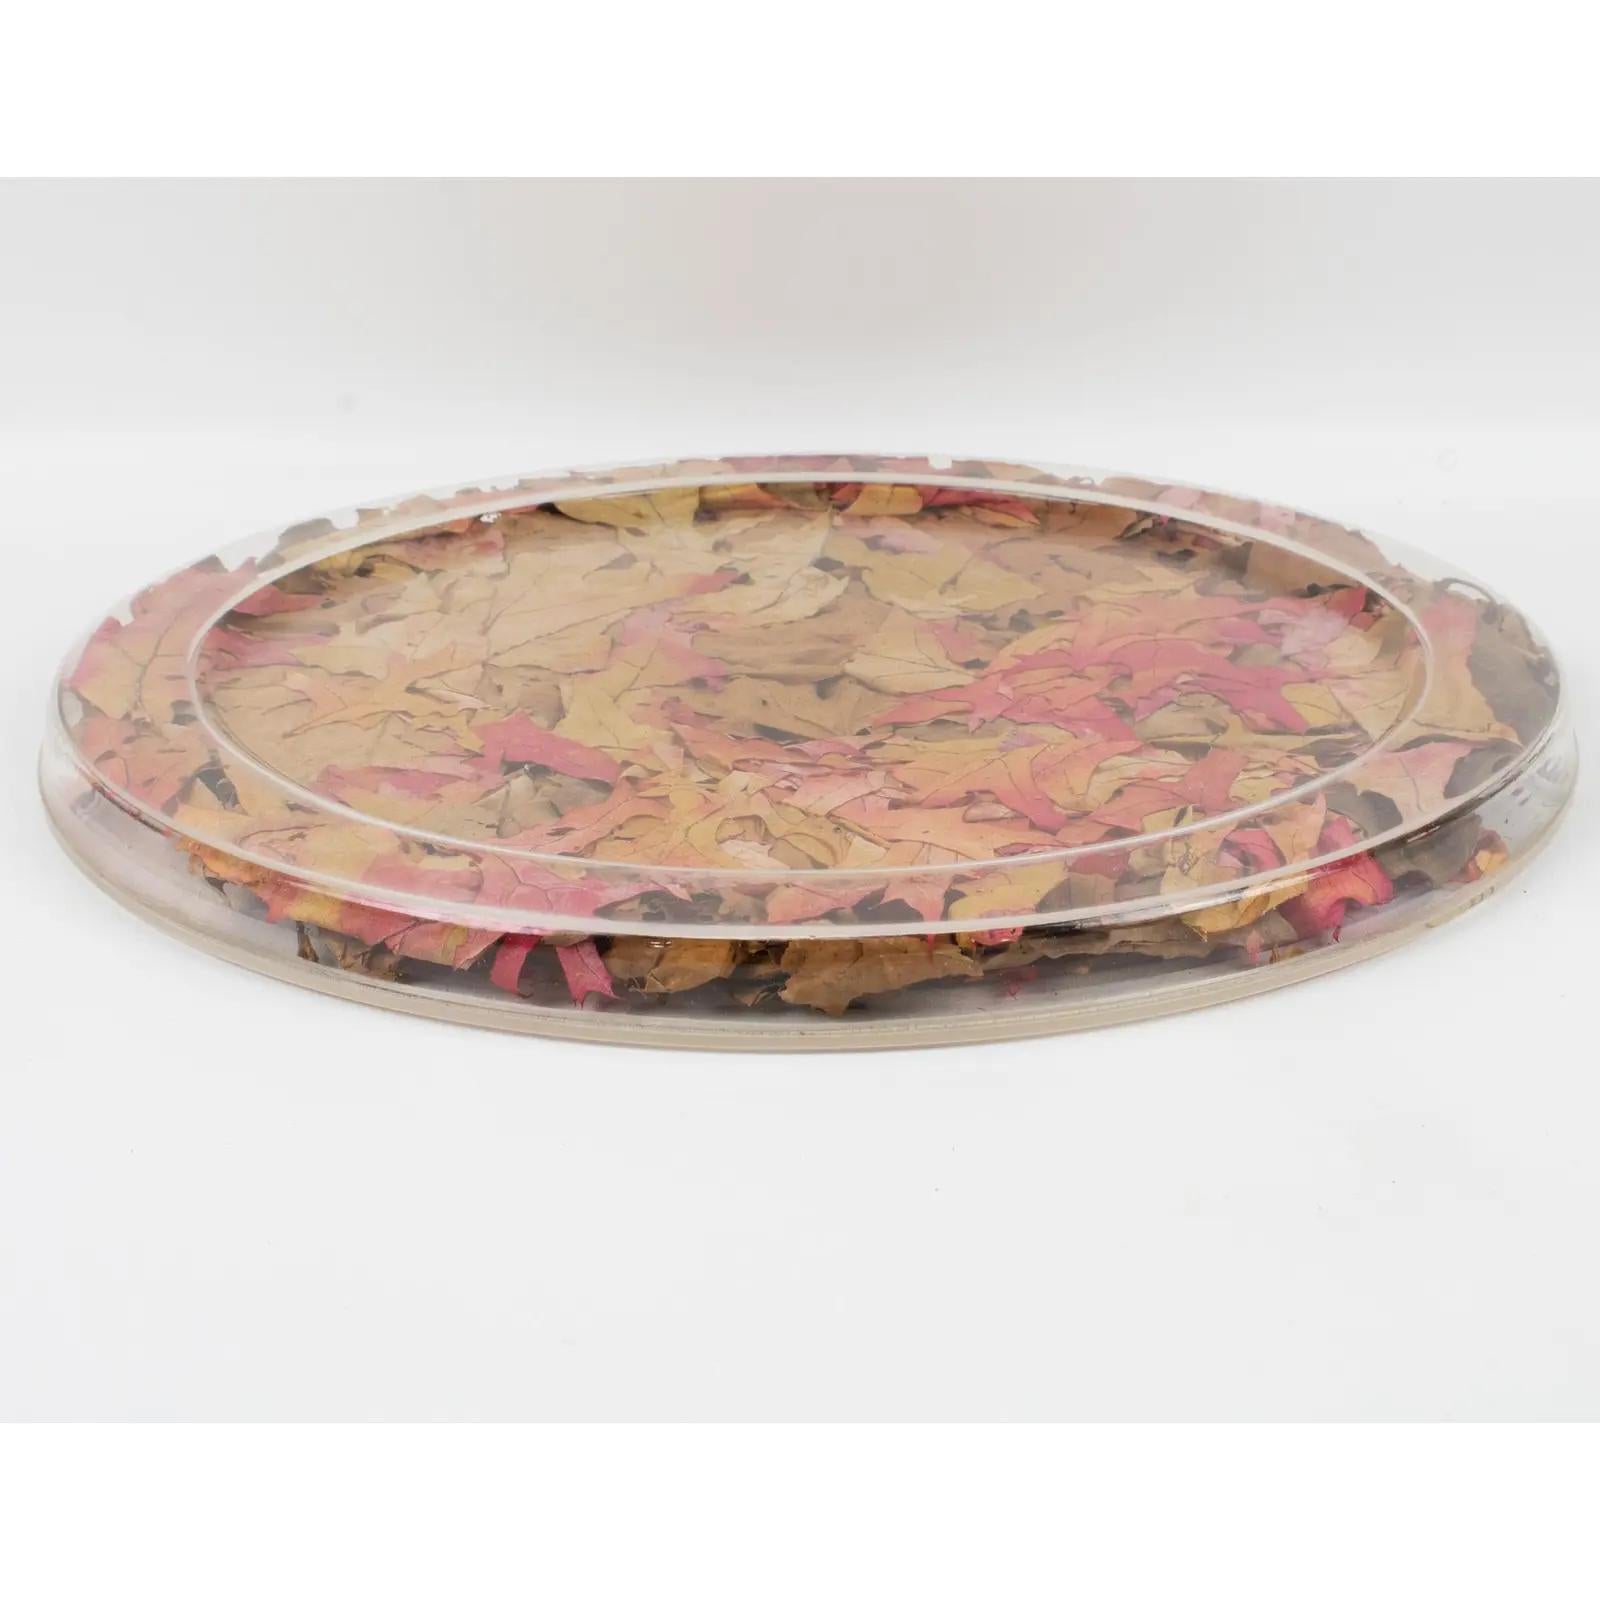 Late 20th Century Christian Dior Tray Board Platter Lucite and Autumn Maple Leaves, 1970s